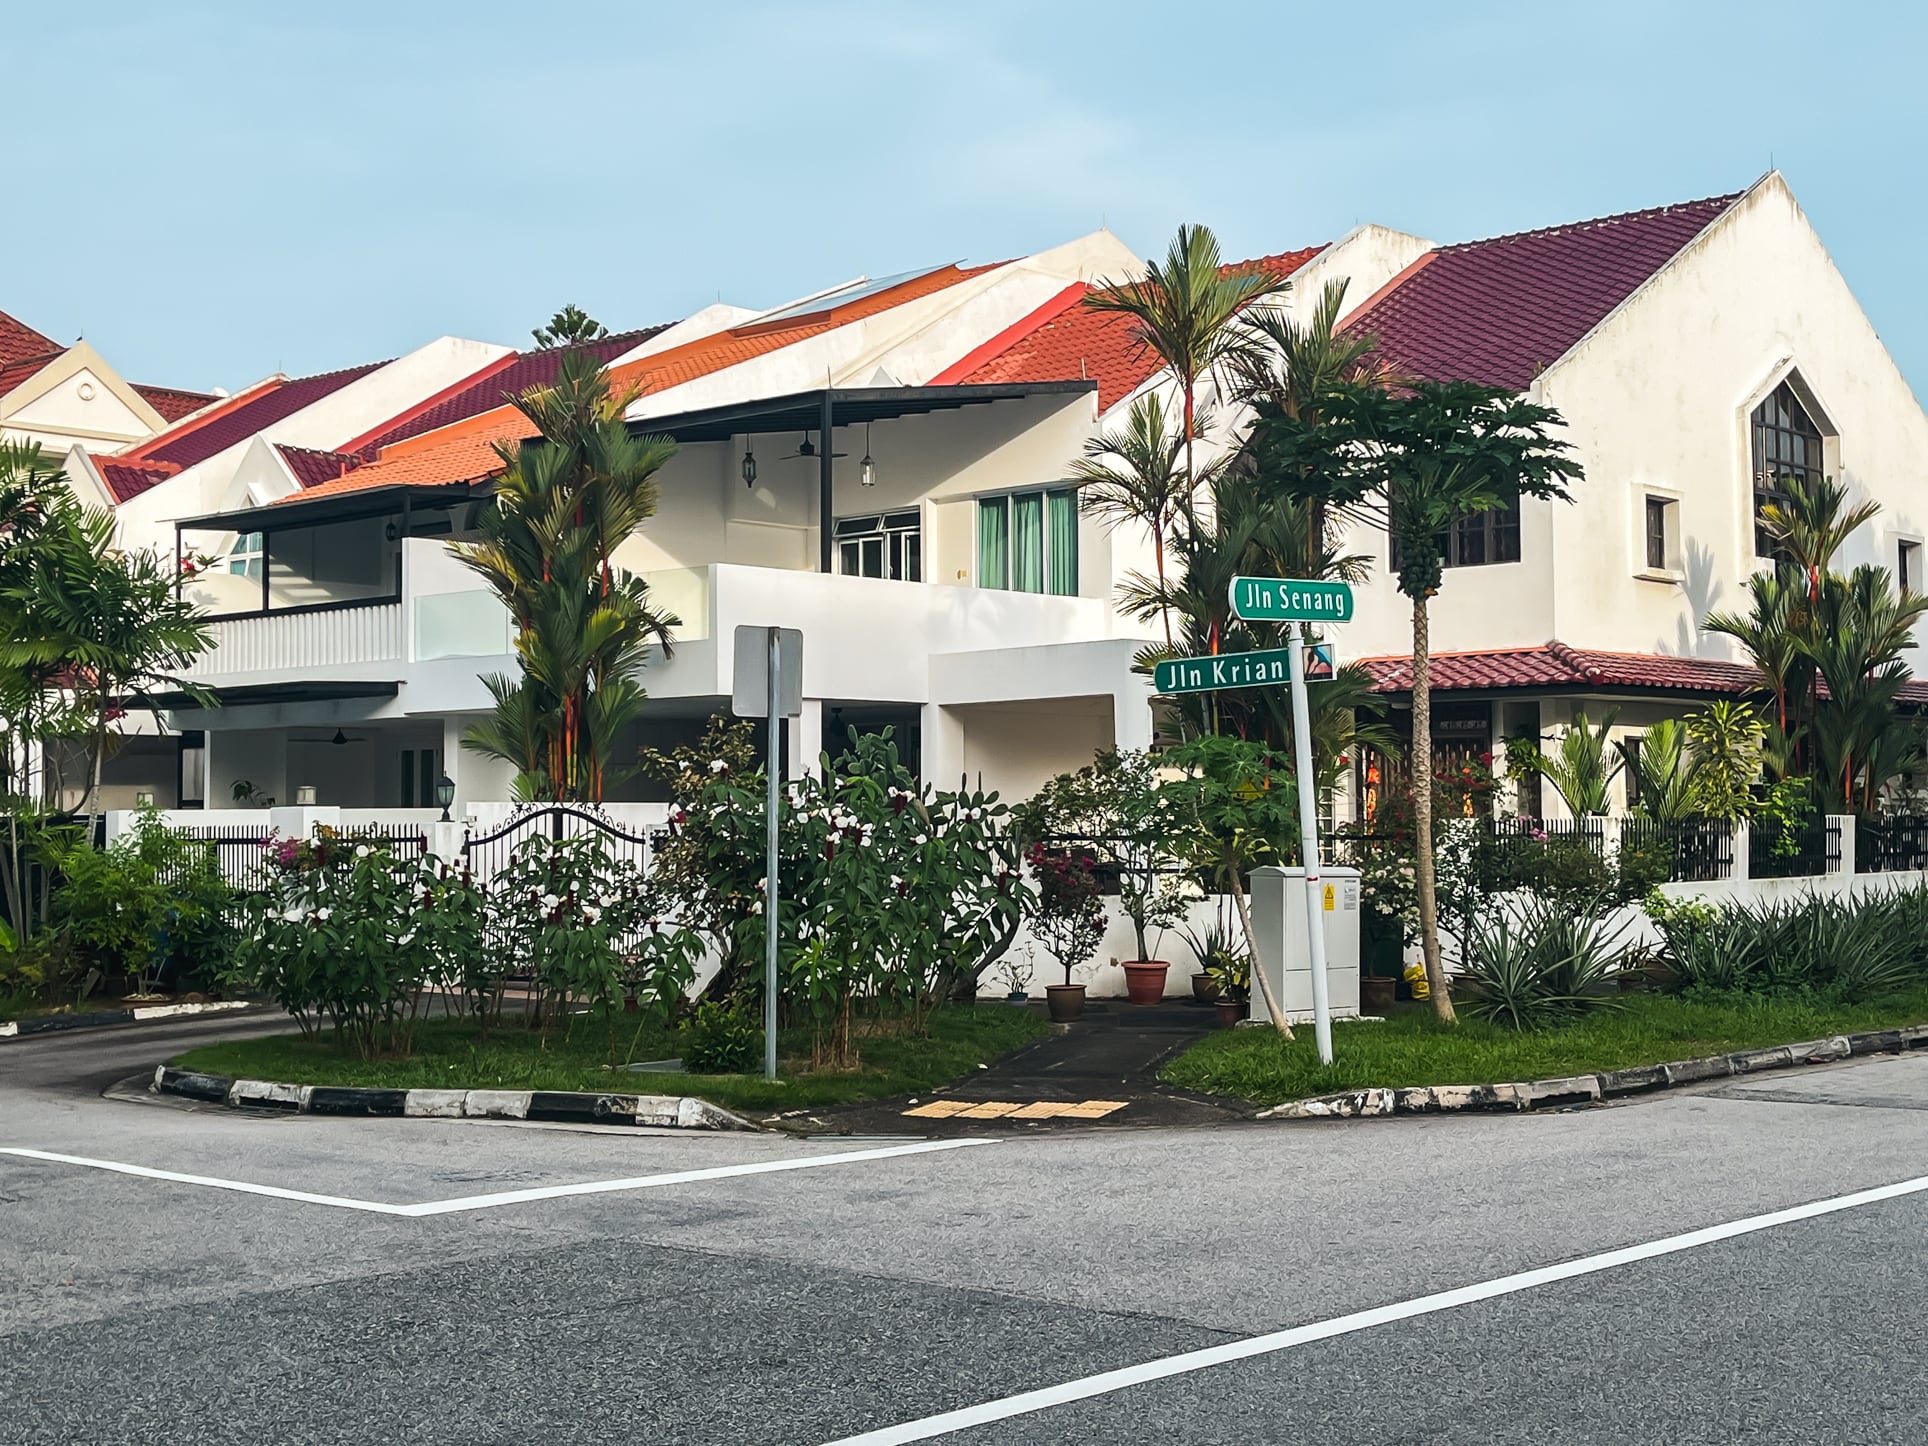 Touring Jalan Senang: Attainable Freehold Landed Homes From $3 Million (But Near Industrial Area).